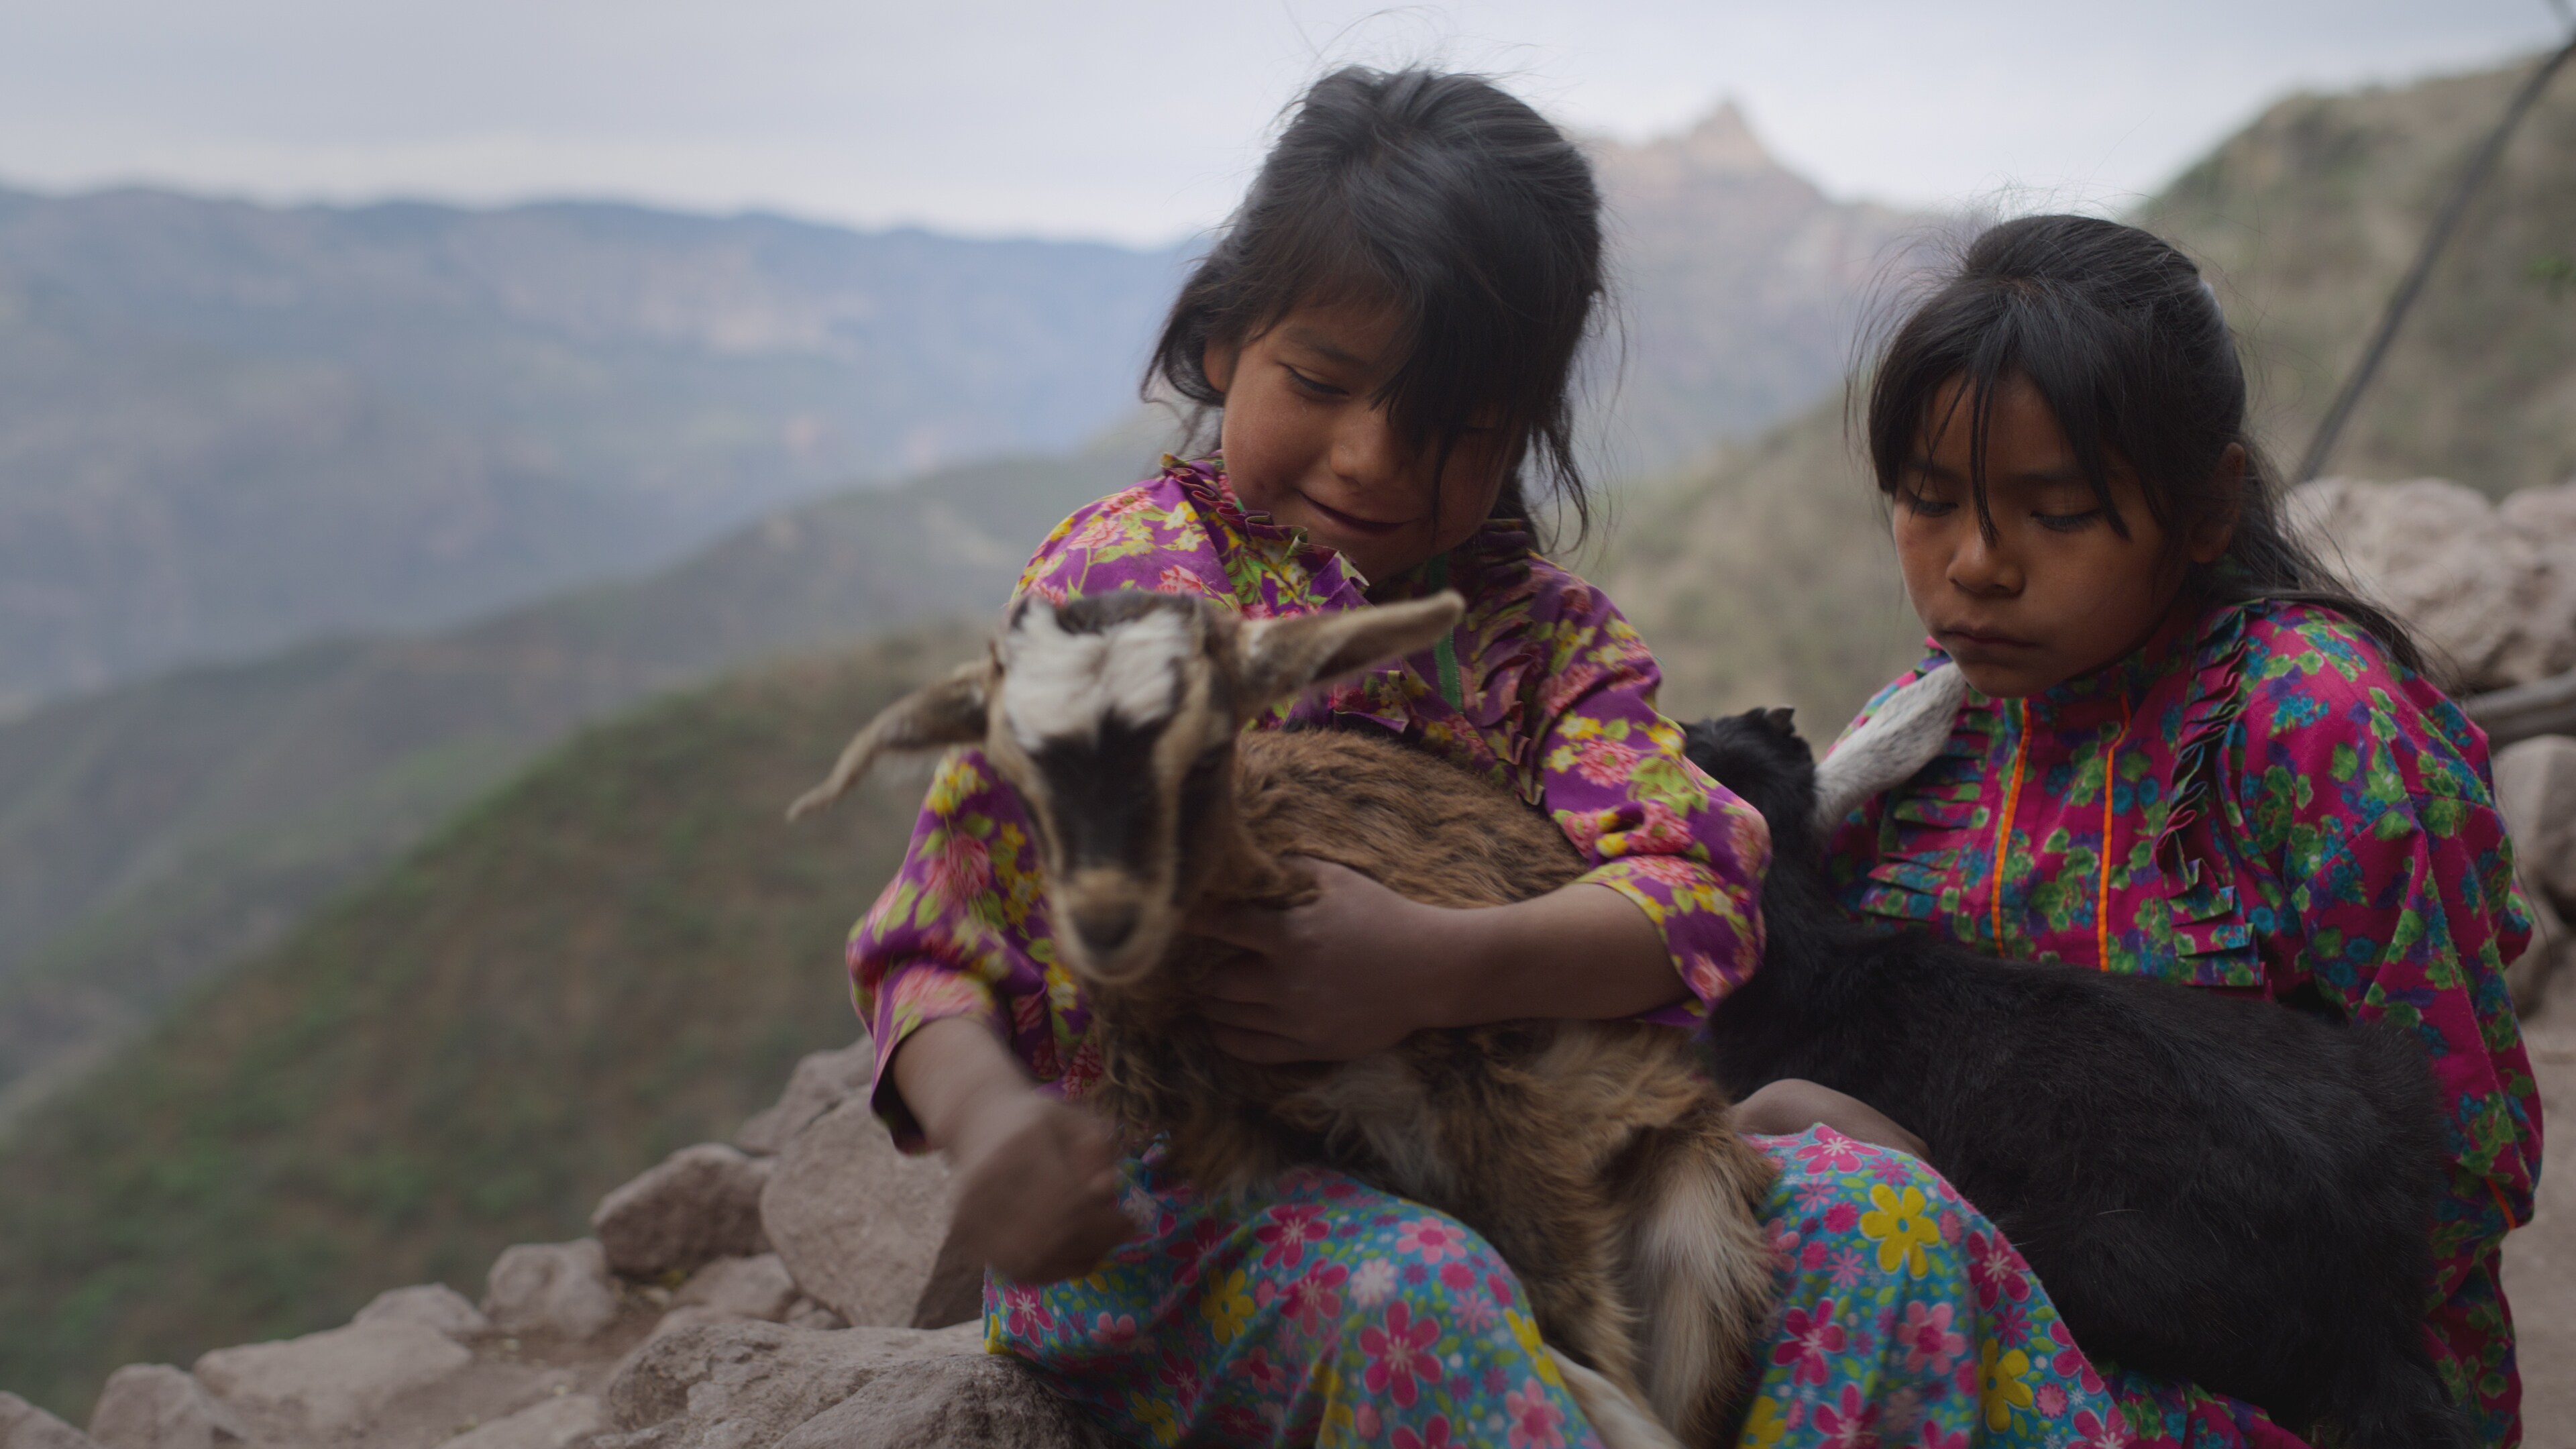 Sofia and Imelda (Catalina's daughters) sit with goats. (National Geographic for Disney+)